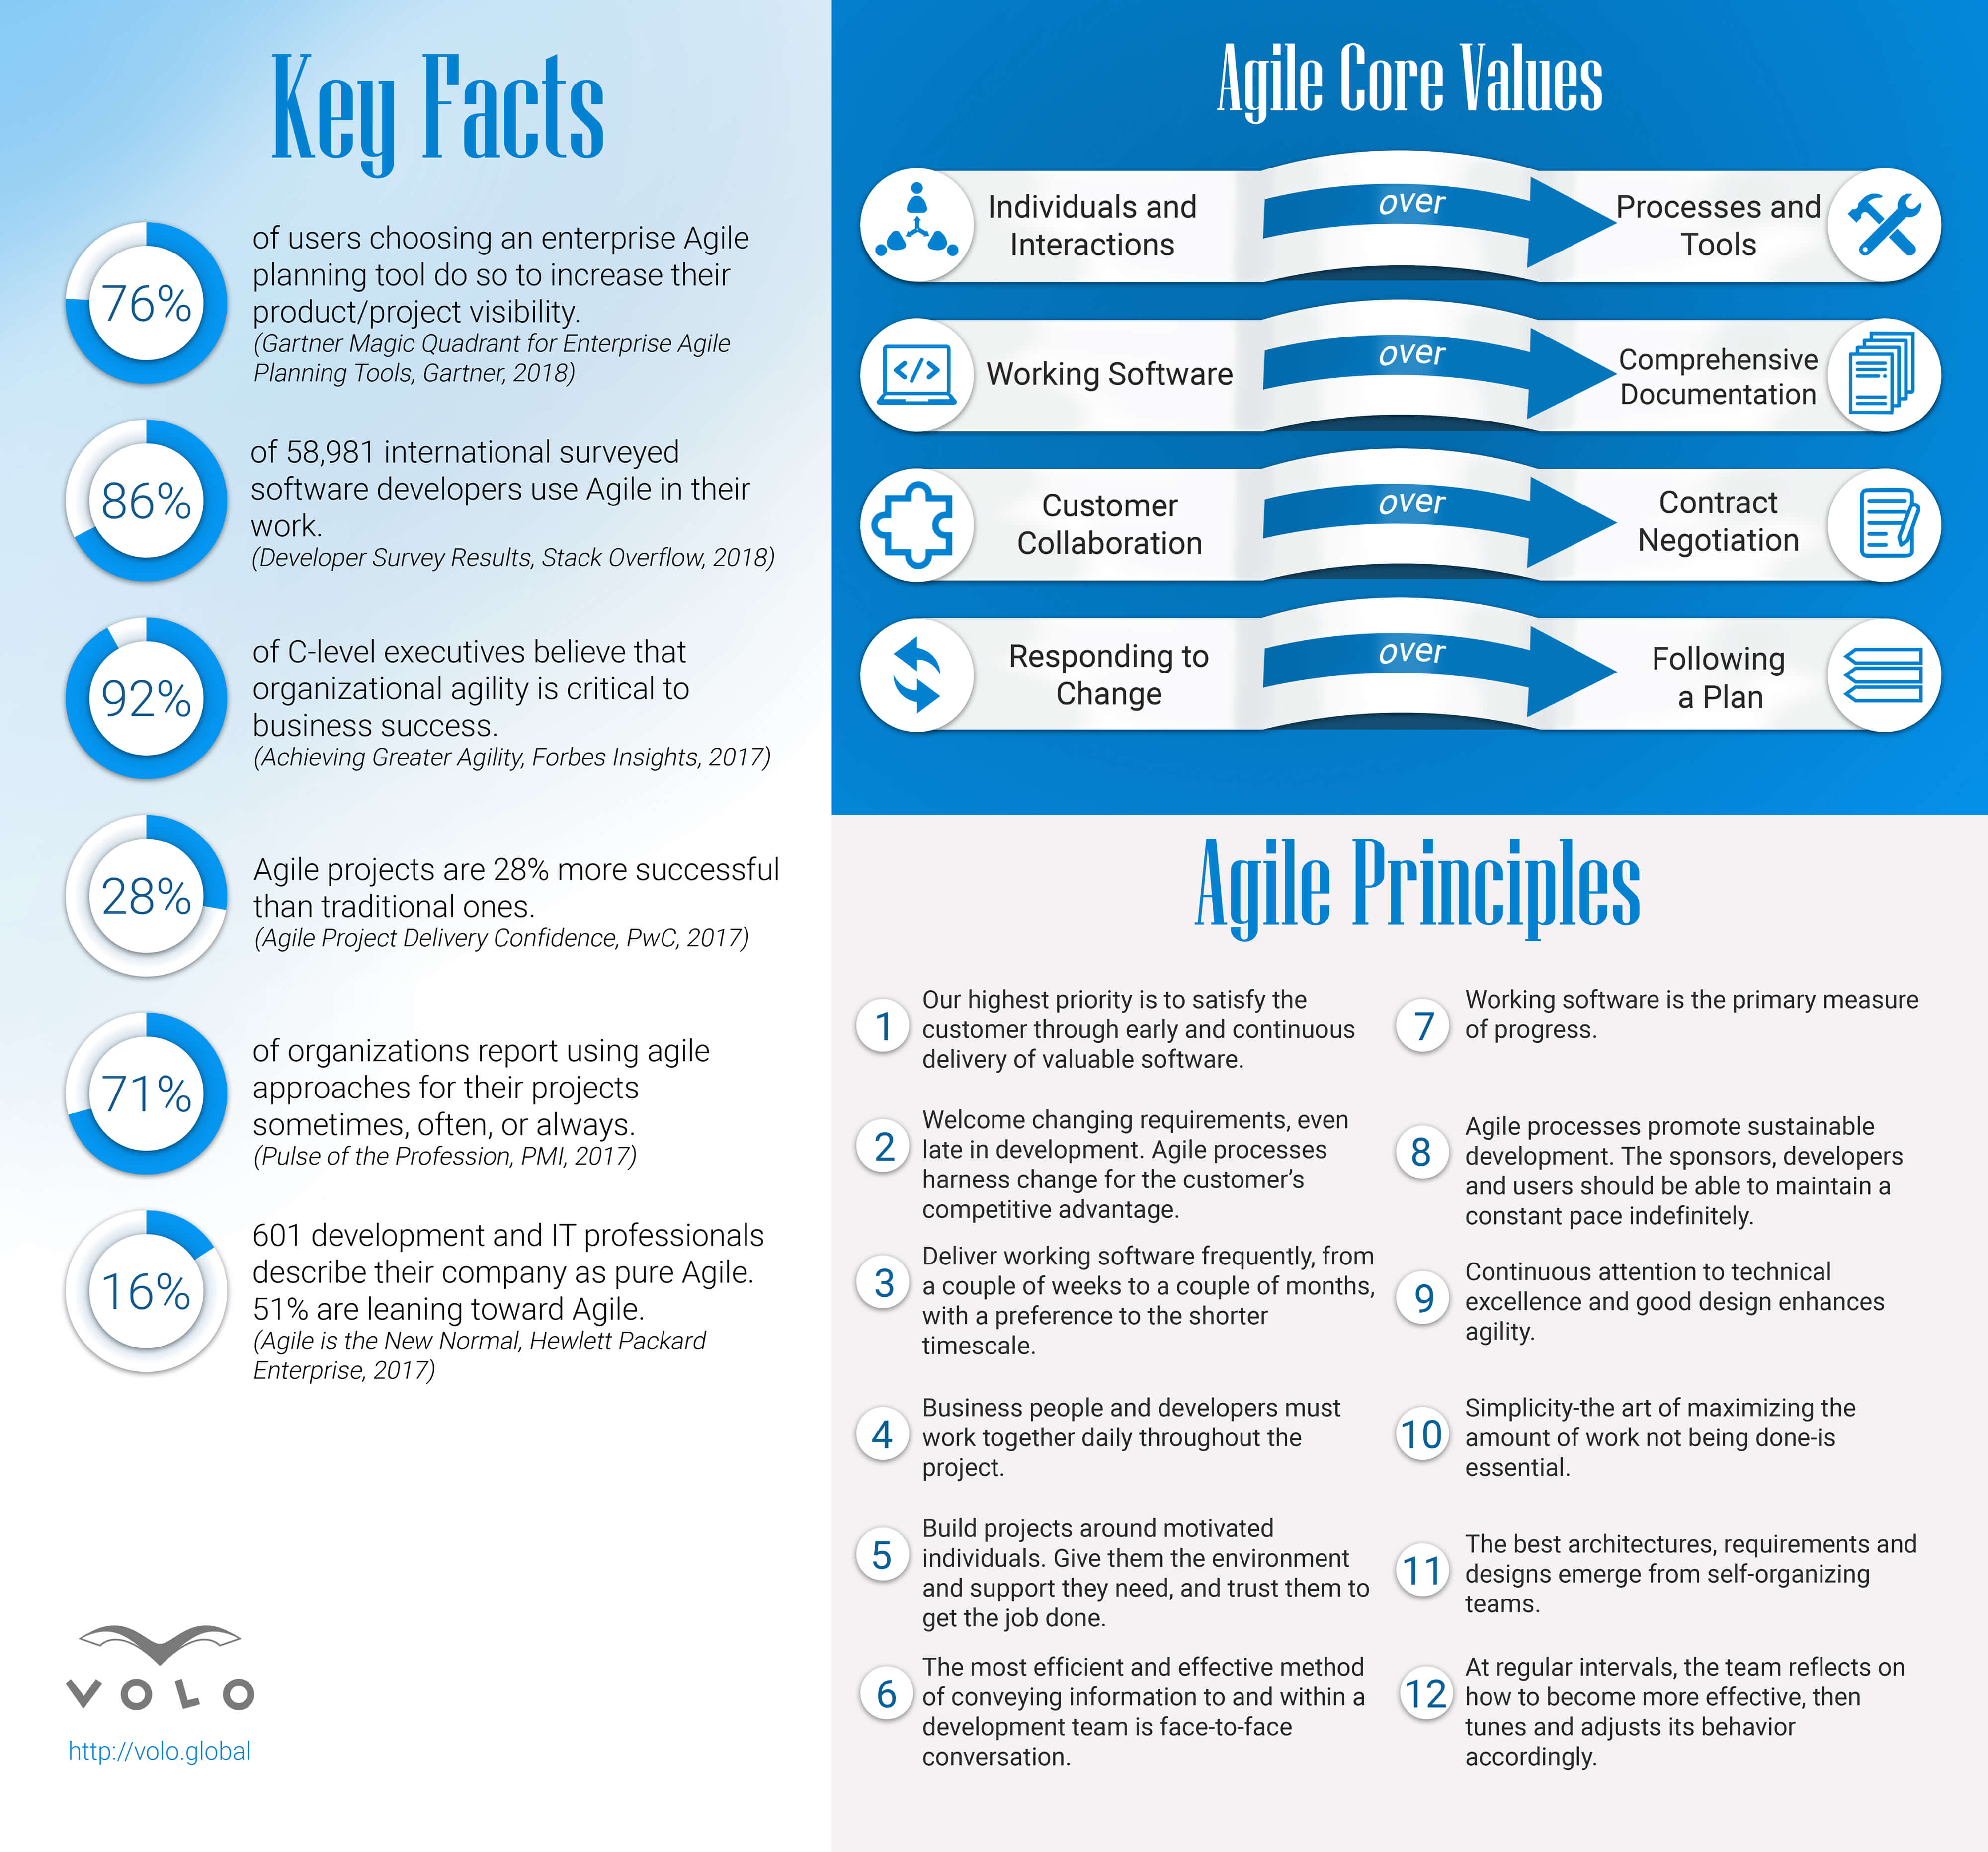 Agile facts, values and principles